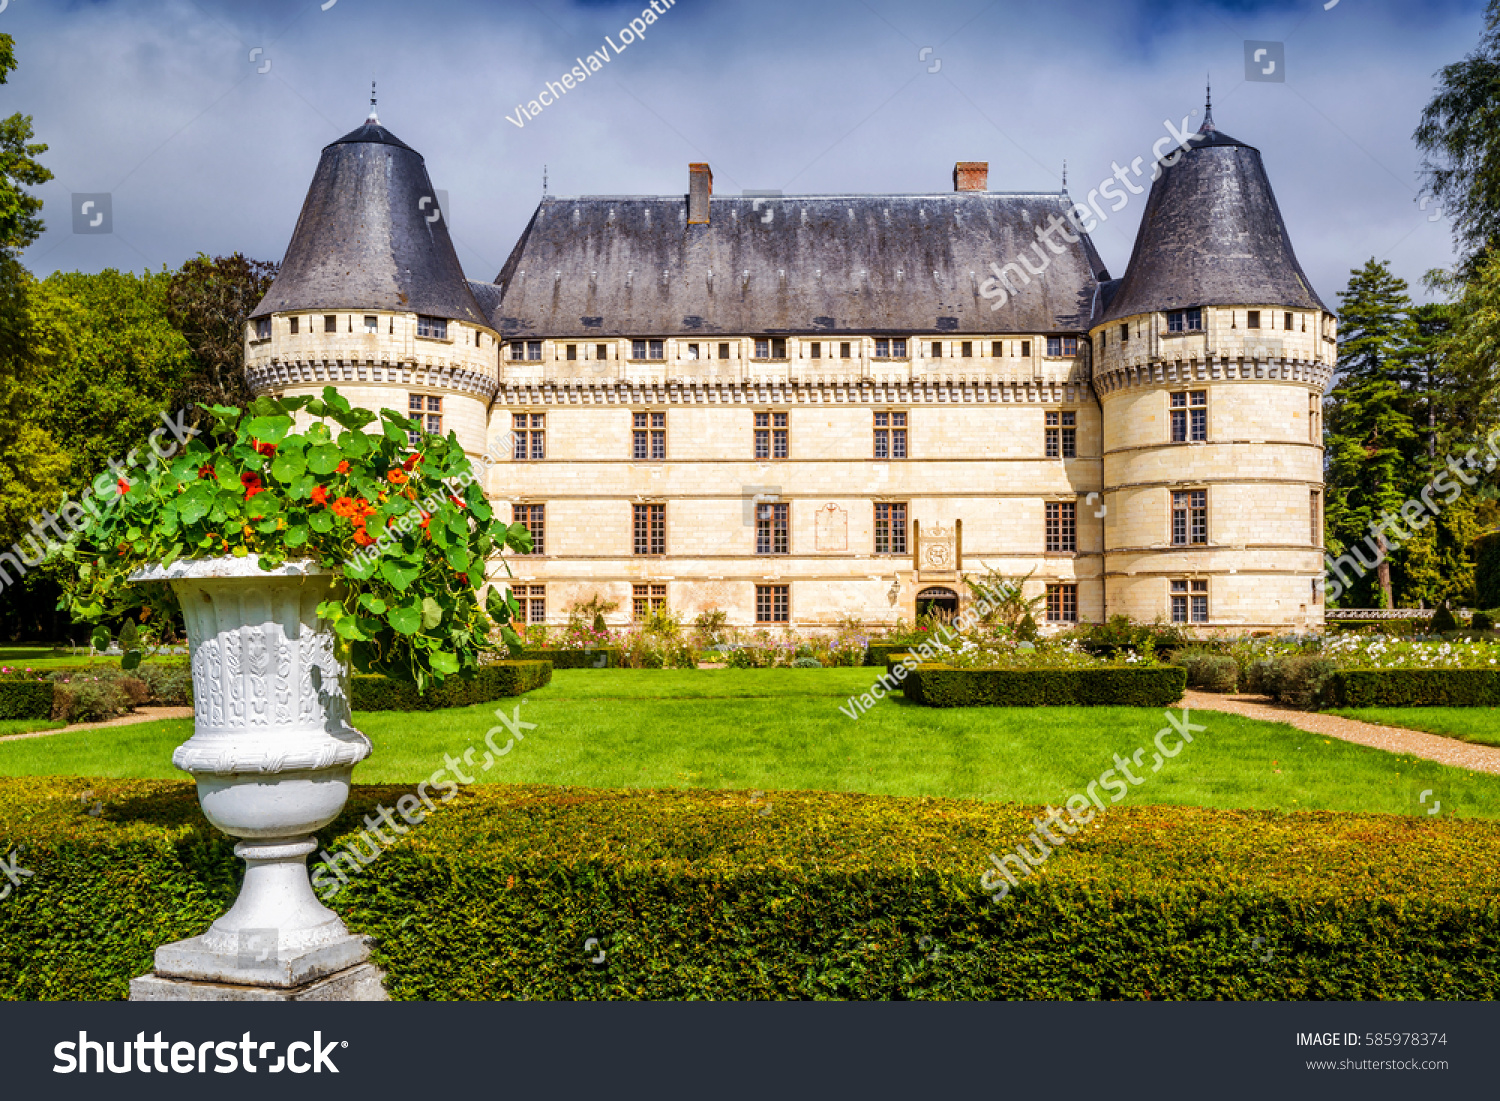 Chateau de l'Islette, France. This Renaissance castle is one of the main landmarks in the Loire Valley. Scenic view of the French castle in summer. Panorama of the old castle with beautiful garden. #585978374